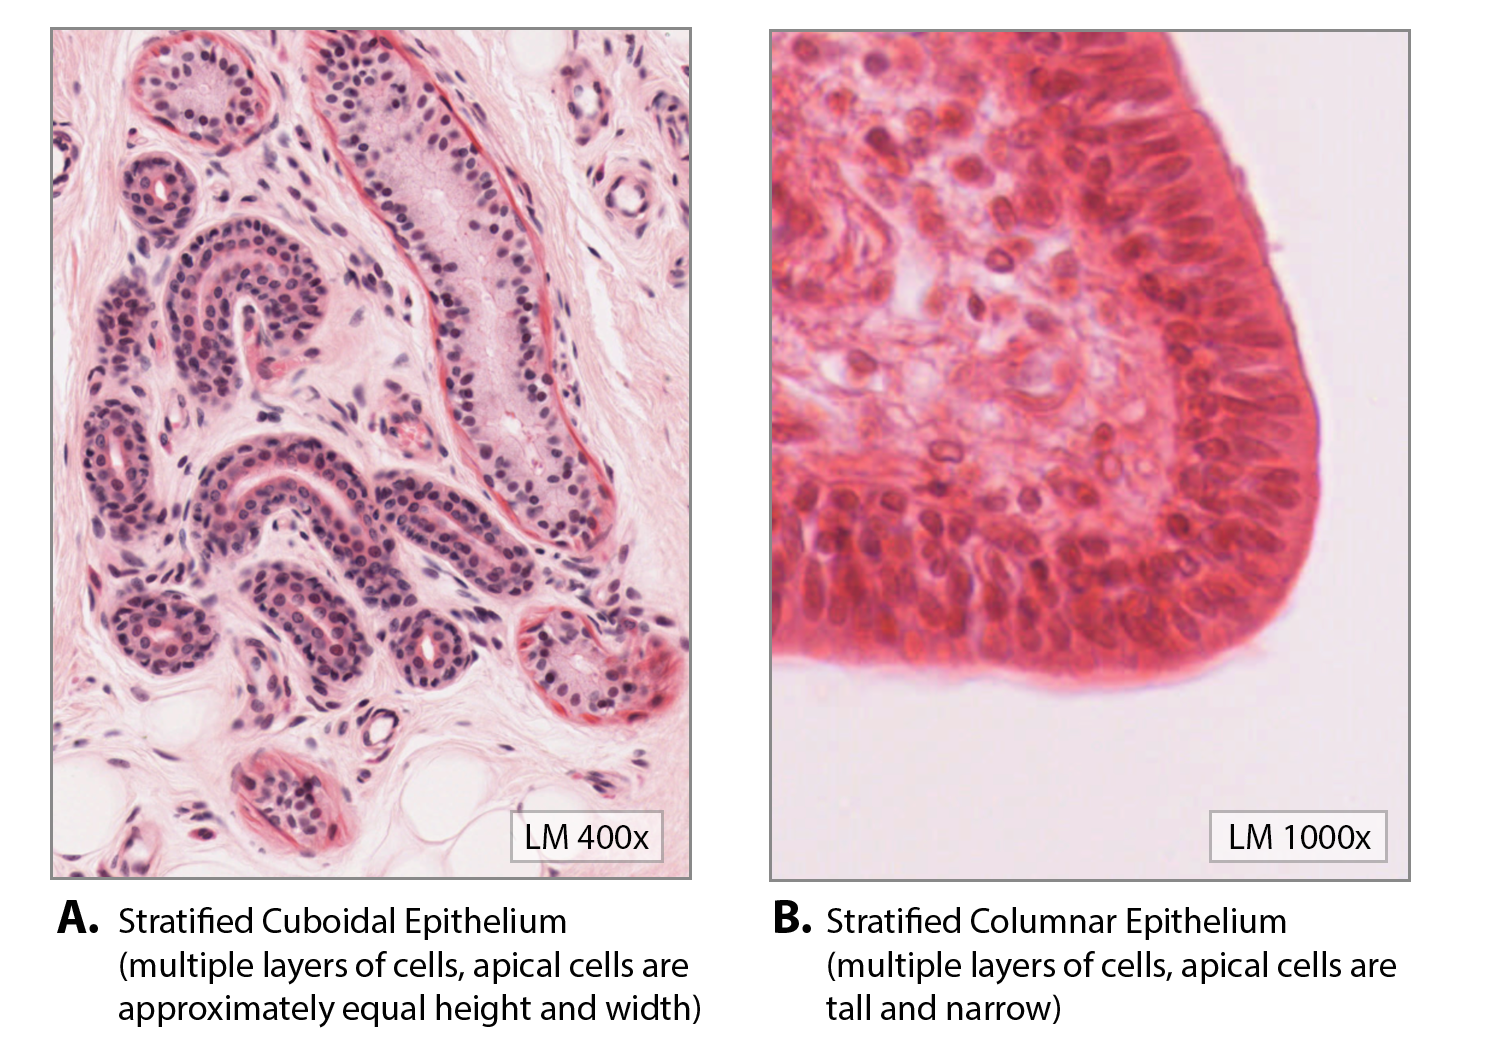 Stratified_Cuboidal_and_Stratified_Columnar_Epithelia_Histology.png